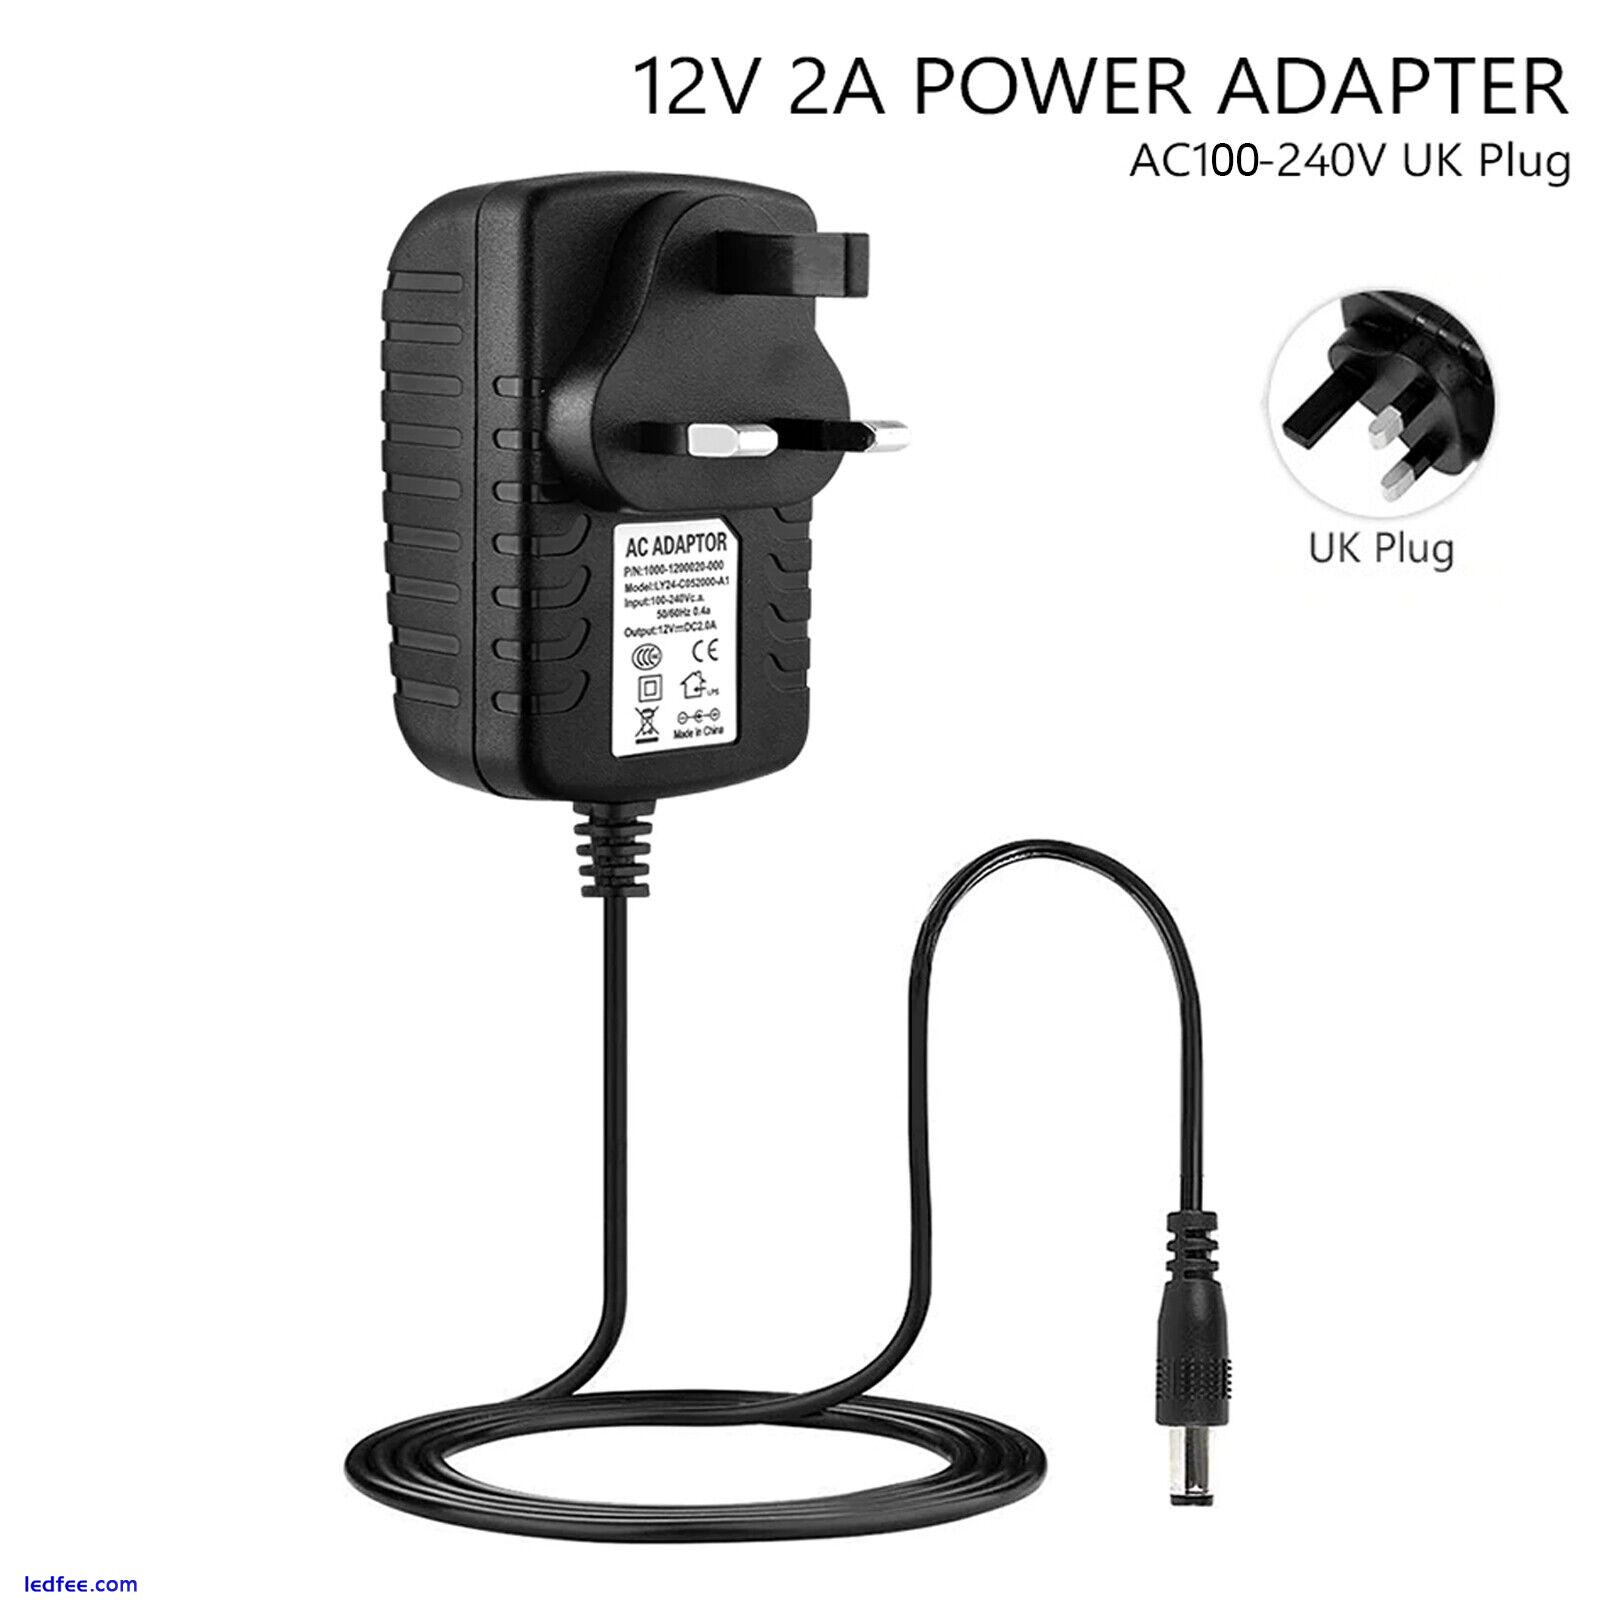 12V 1A/2A/3A AC DC POWER SUPPLY ADAPTER CHARGER FOR CAMERA LED STRIP LIGHT CCTV 5 